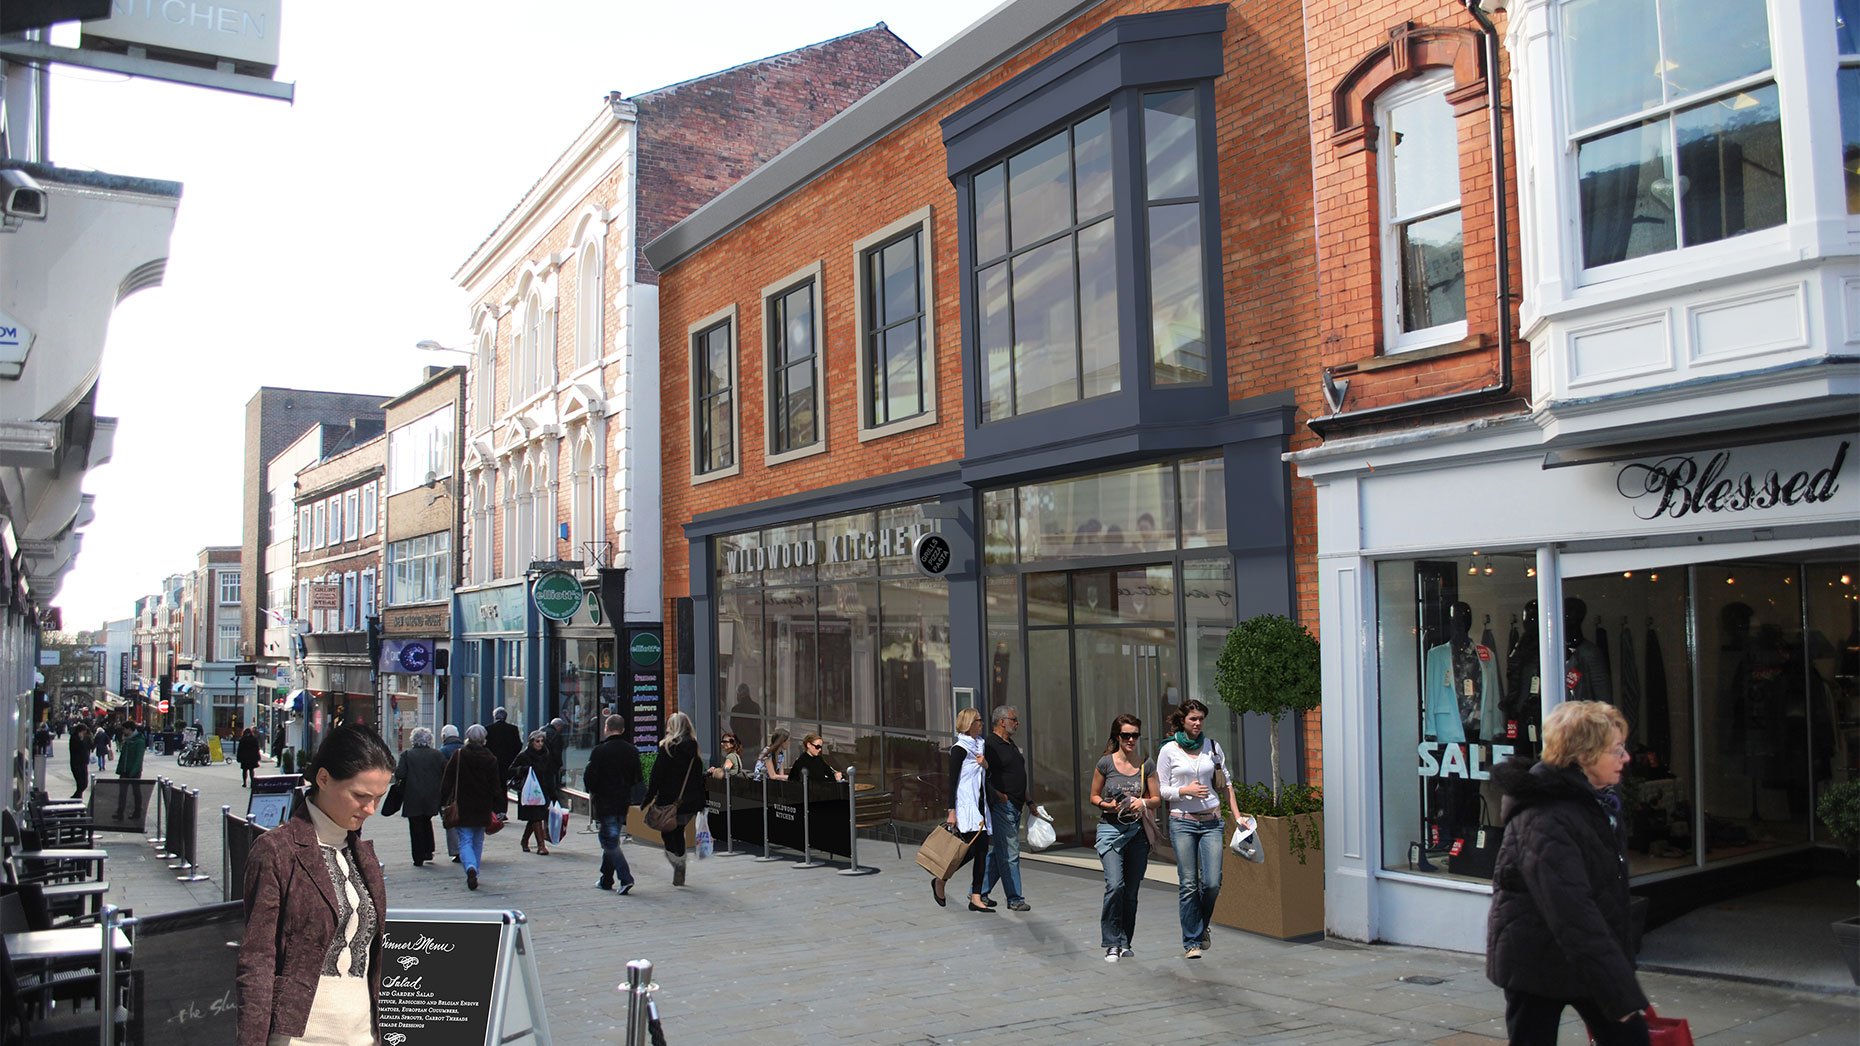 The Wildwood chain is taking over the former Mall on Lincoln High Street.